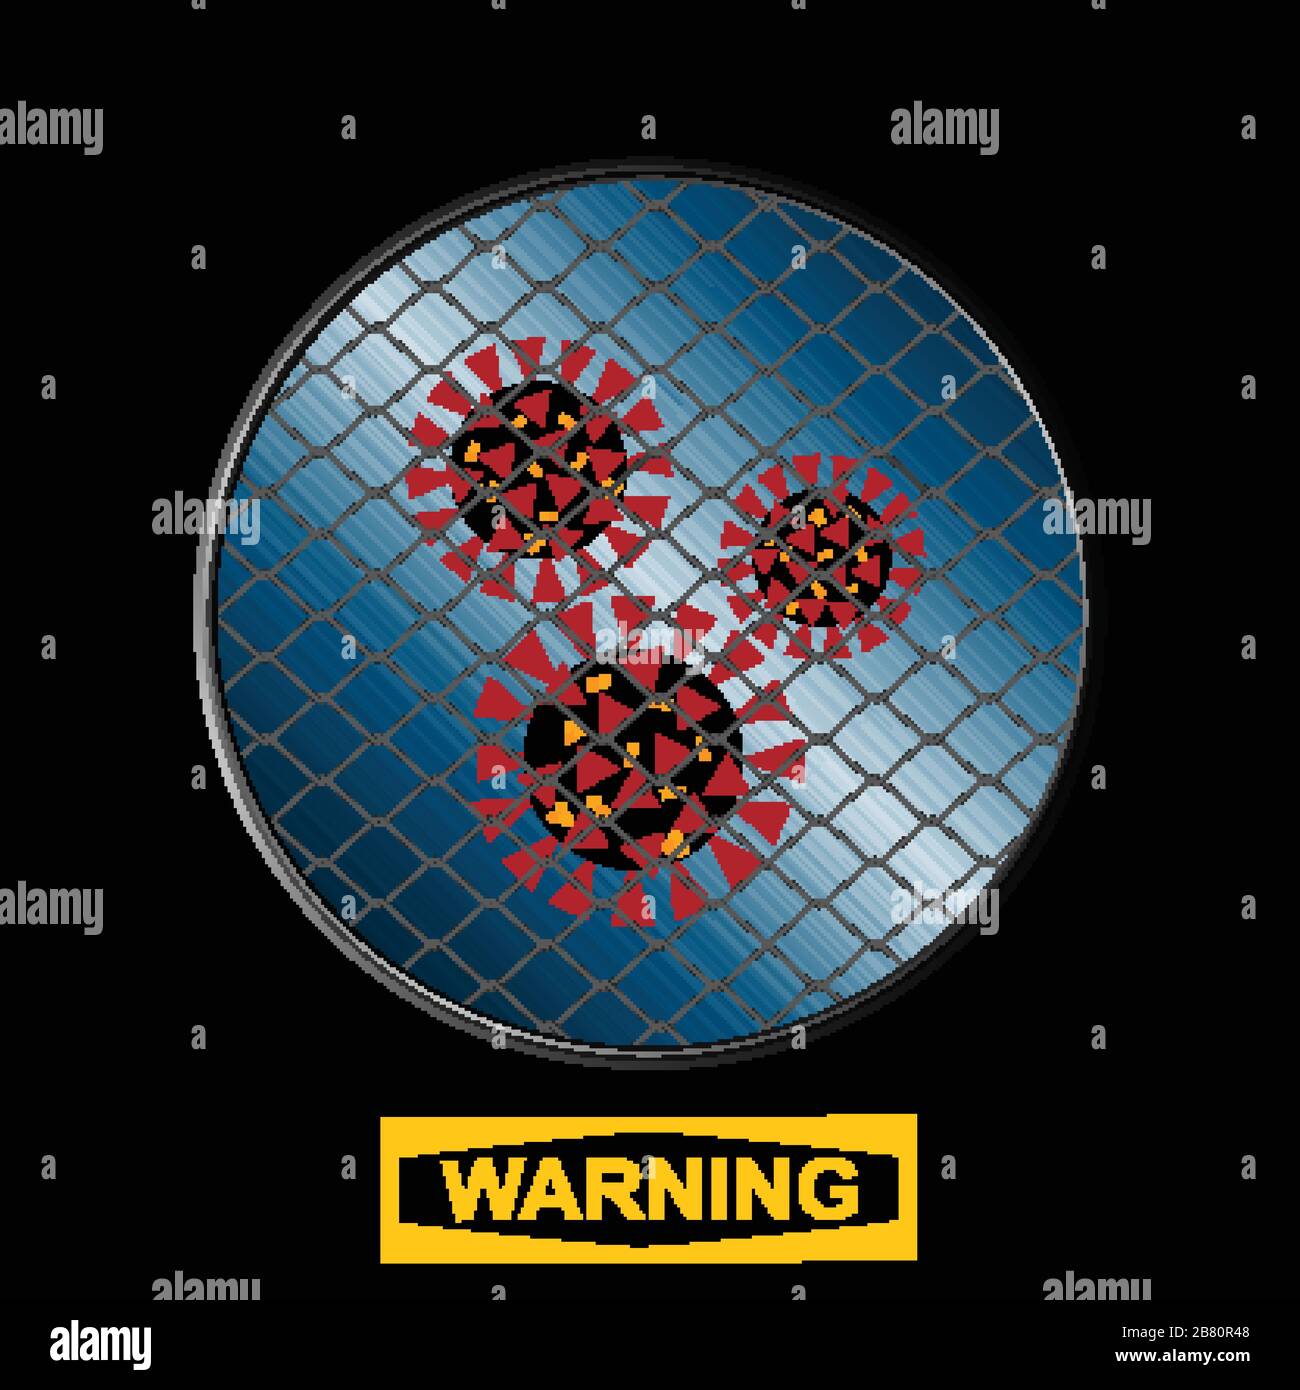 Molecule of Virus contained with Metallic Net Inside Circular Border over Black background with Yellow Warning Sign Illustrazione Vettoriale